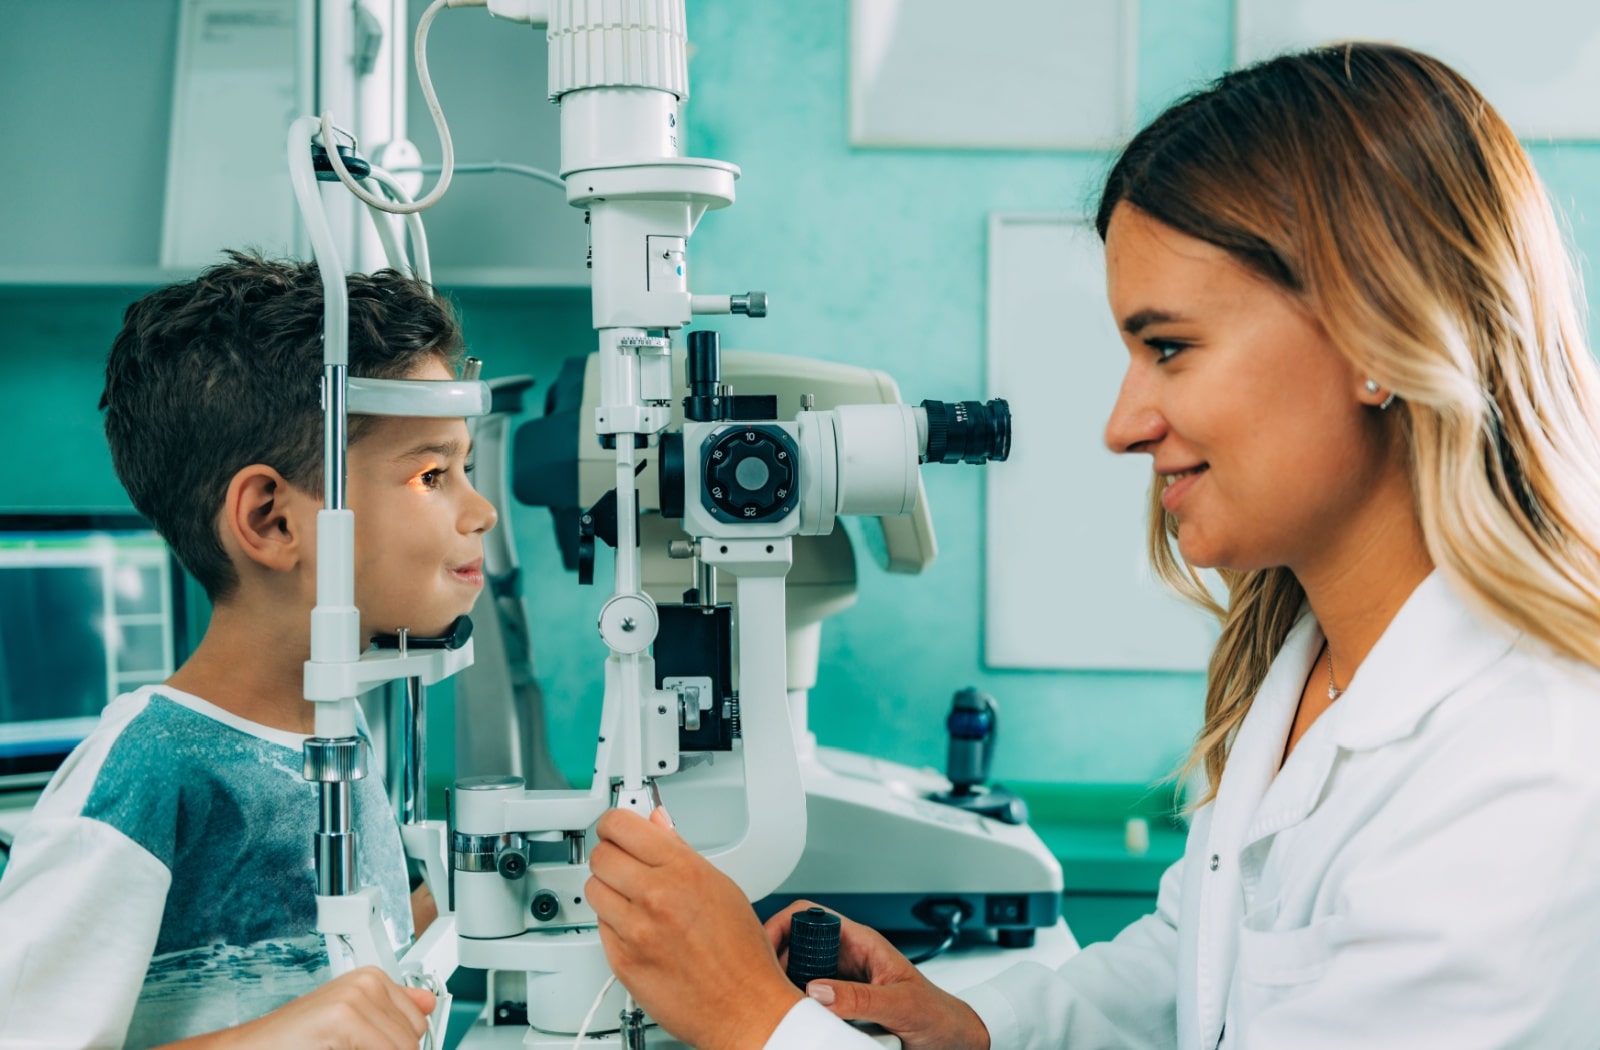 A female optometrist uses a slit lamp to examine a young boy's eyes